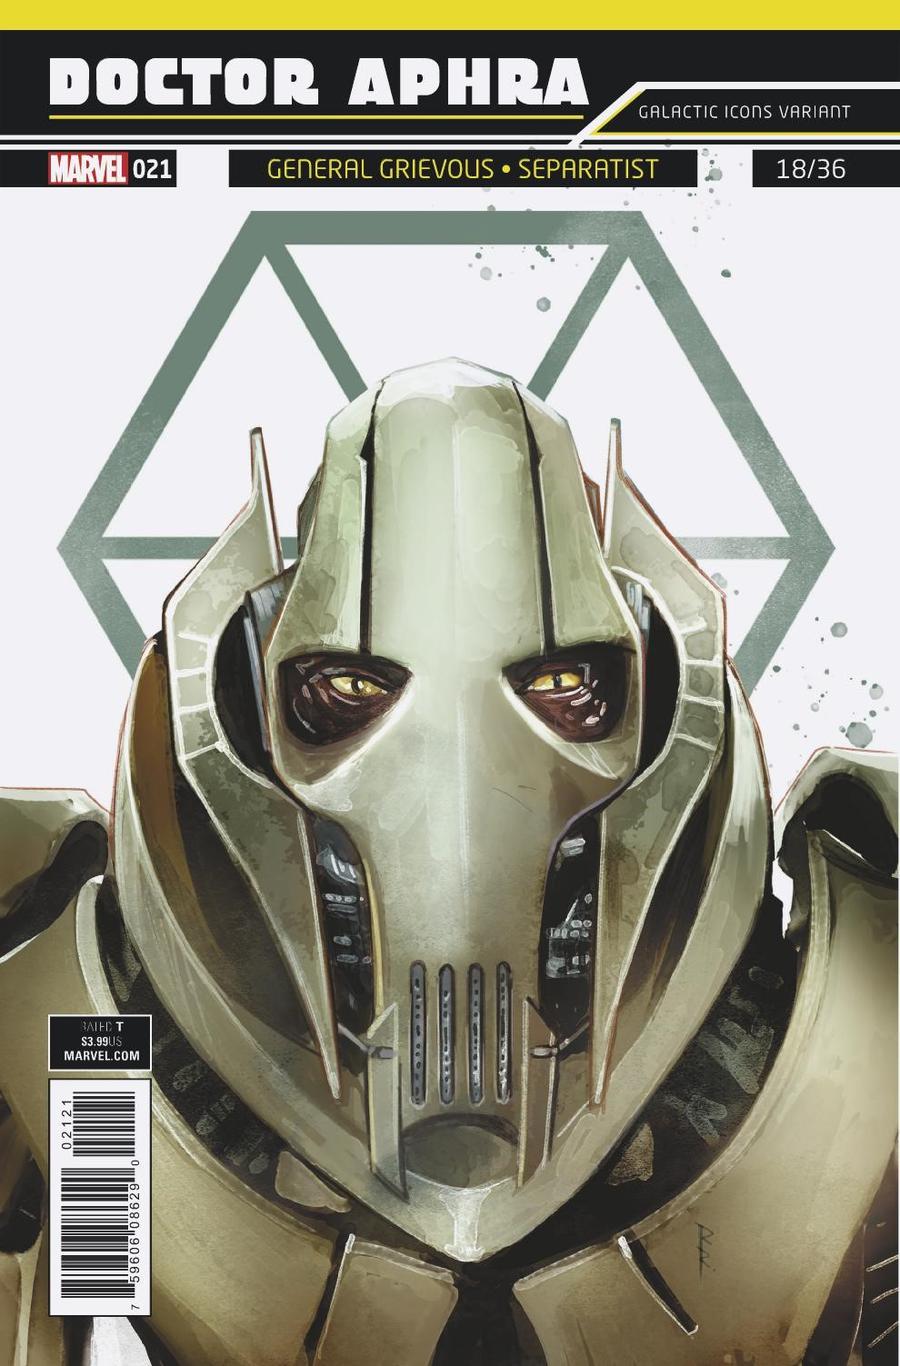 Star Wars Doctor Aphra #21 Cover B Variant Rod Reis Galactic Icon Cover